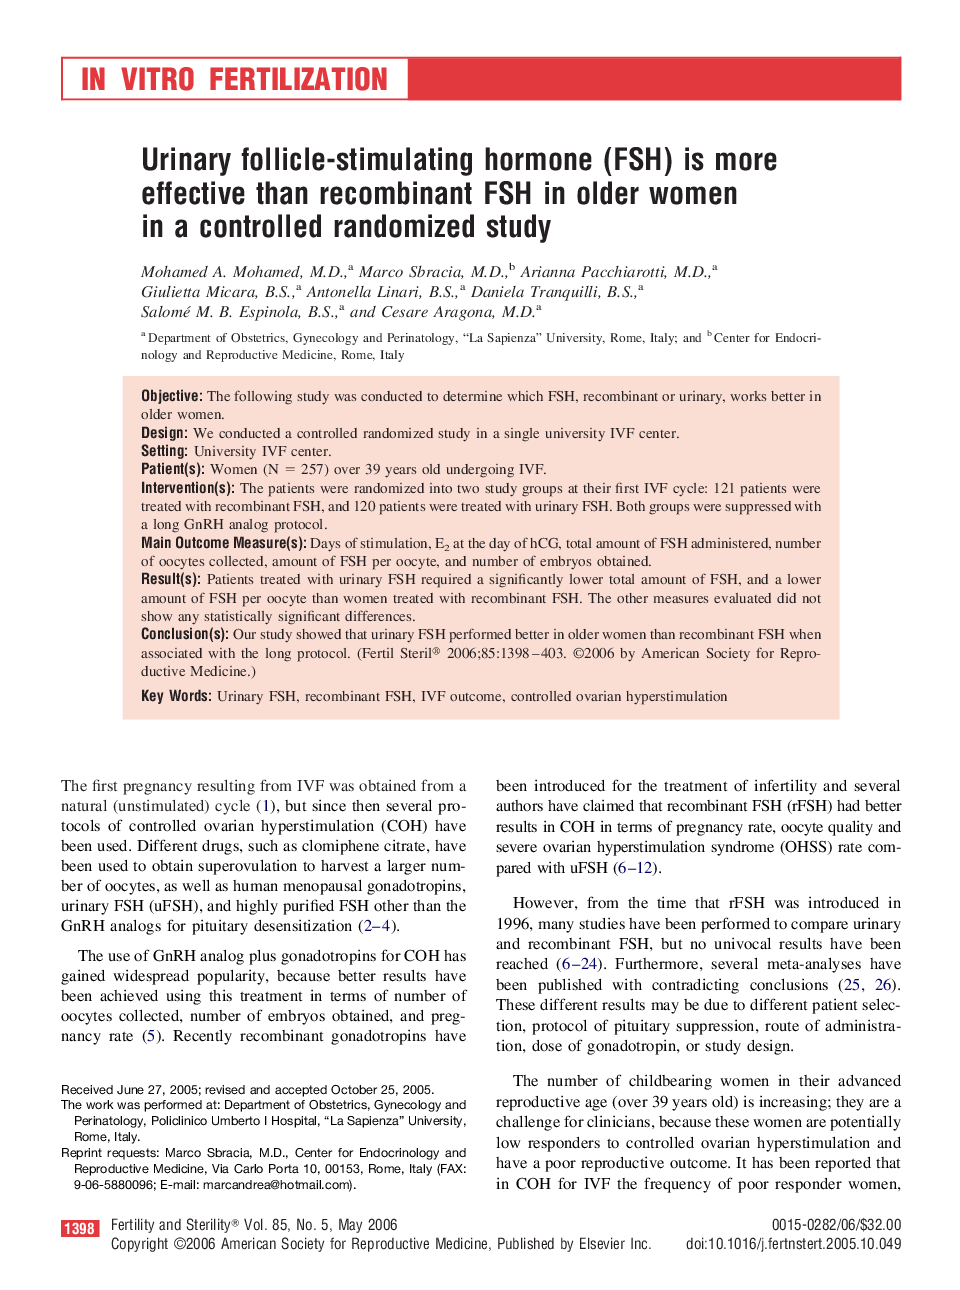 Urinary follicle-stimulating hormone (FSH) is more effective than recombinant FSH in older women in a controlled randomized study 